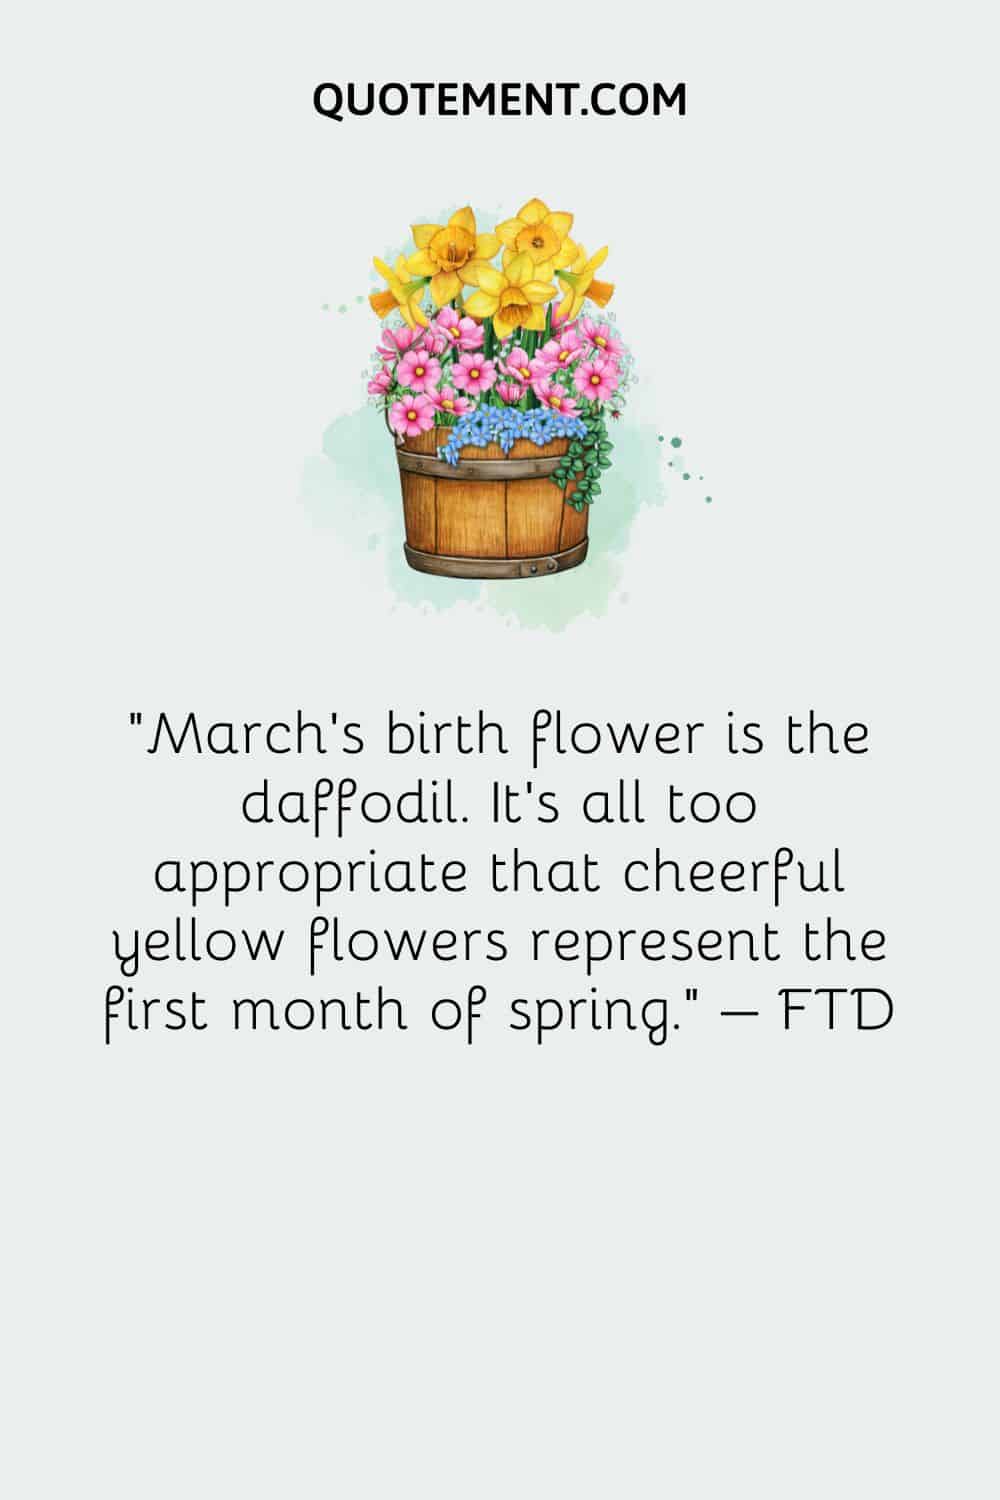 March’s birth flower is the daffodil. It’s all too appropriate that cheerful yellow flowers represent the first month of spring. ­– FTD